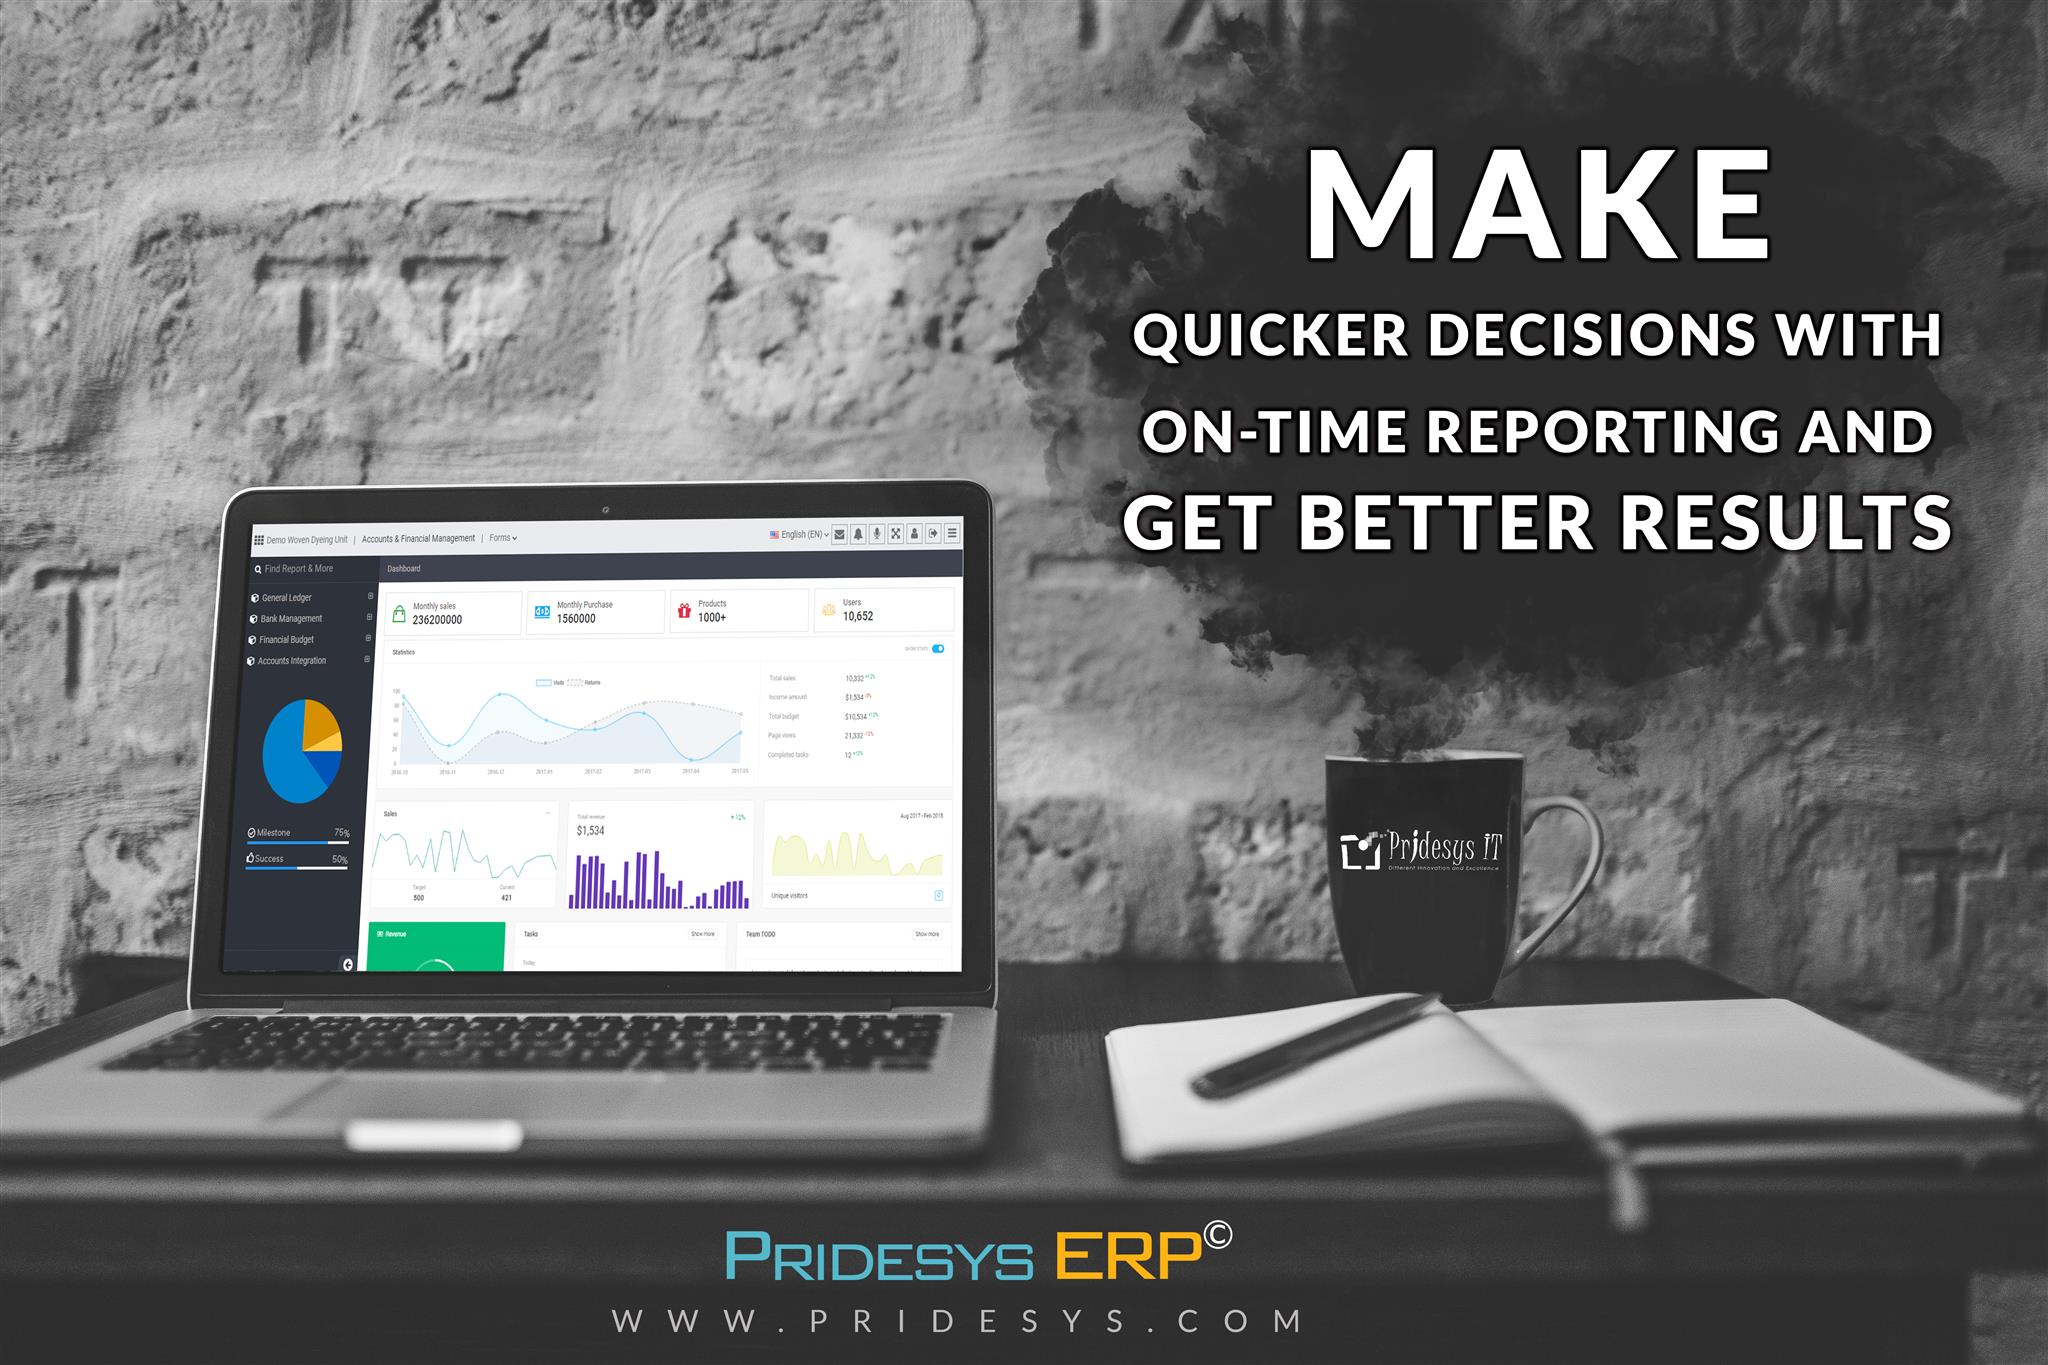 Management Reporting And Analysis | Pridesys IT Ltd